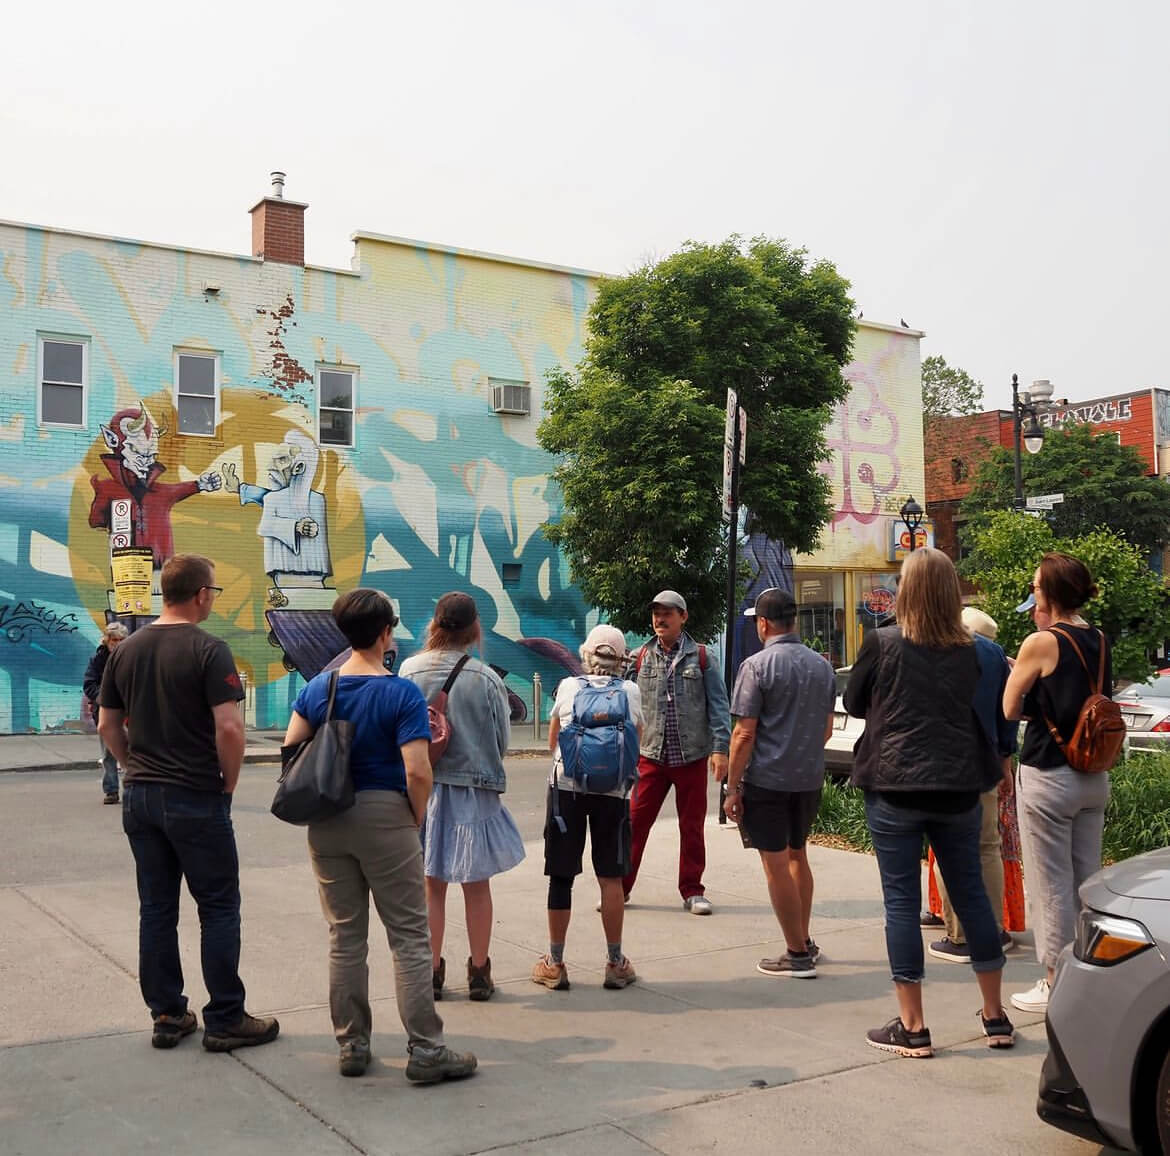 A group of people attentively listens to a guide while exploring vibrant street murals in an urban setting.